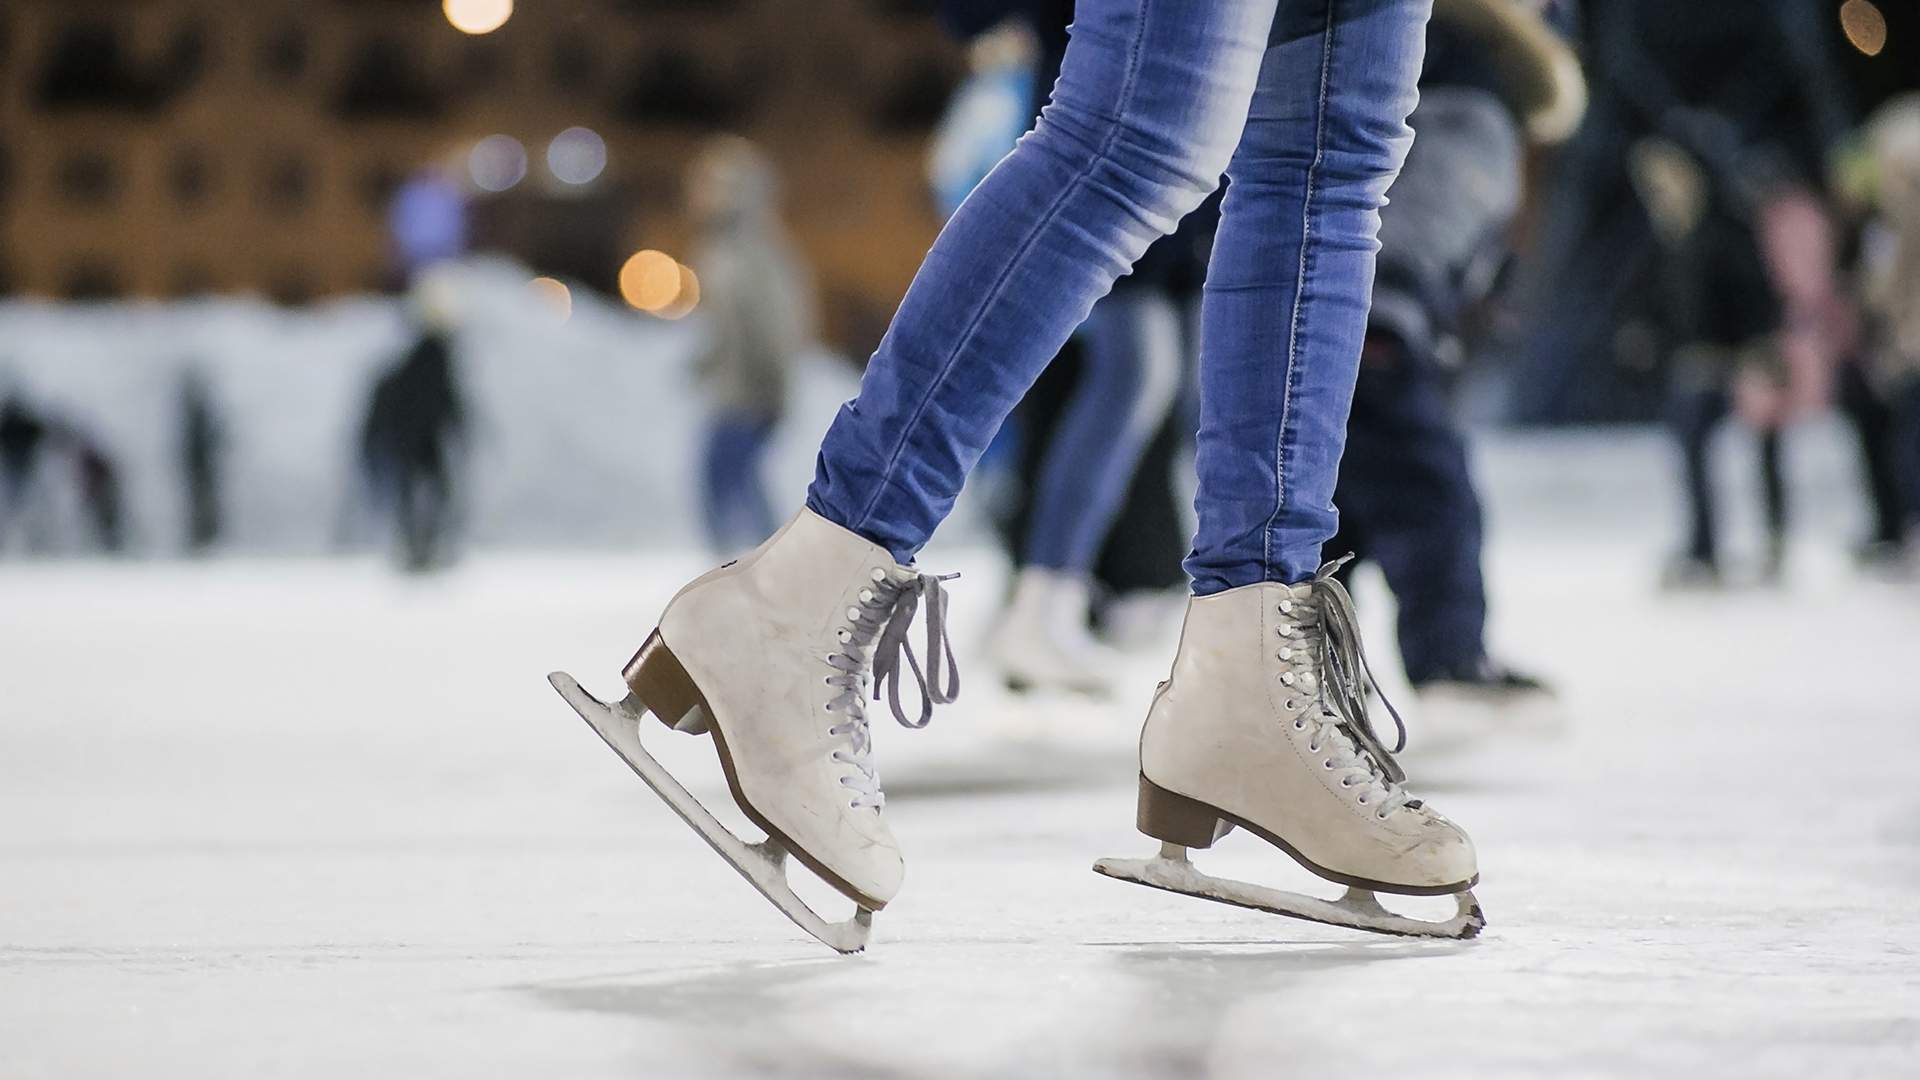 An Ice Skating Rink Is Popping Up in Auckland CBD for Winter